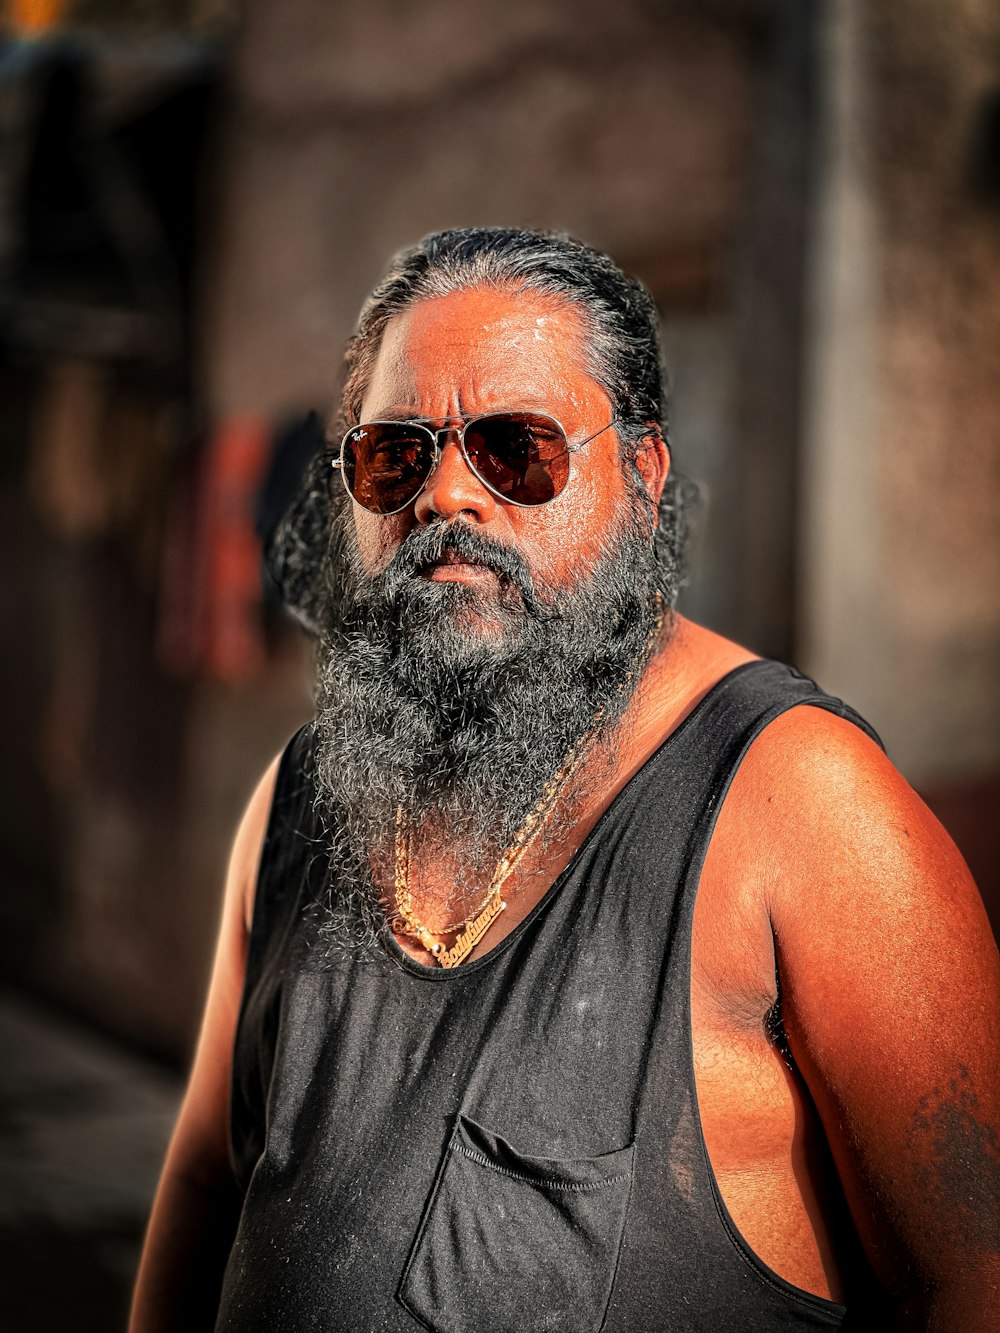 a man with a beard wearing sunglasses and a black tank top